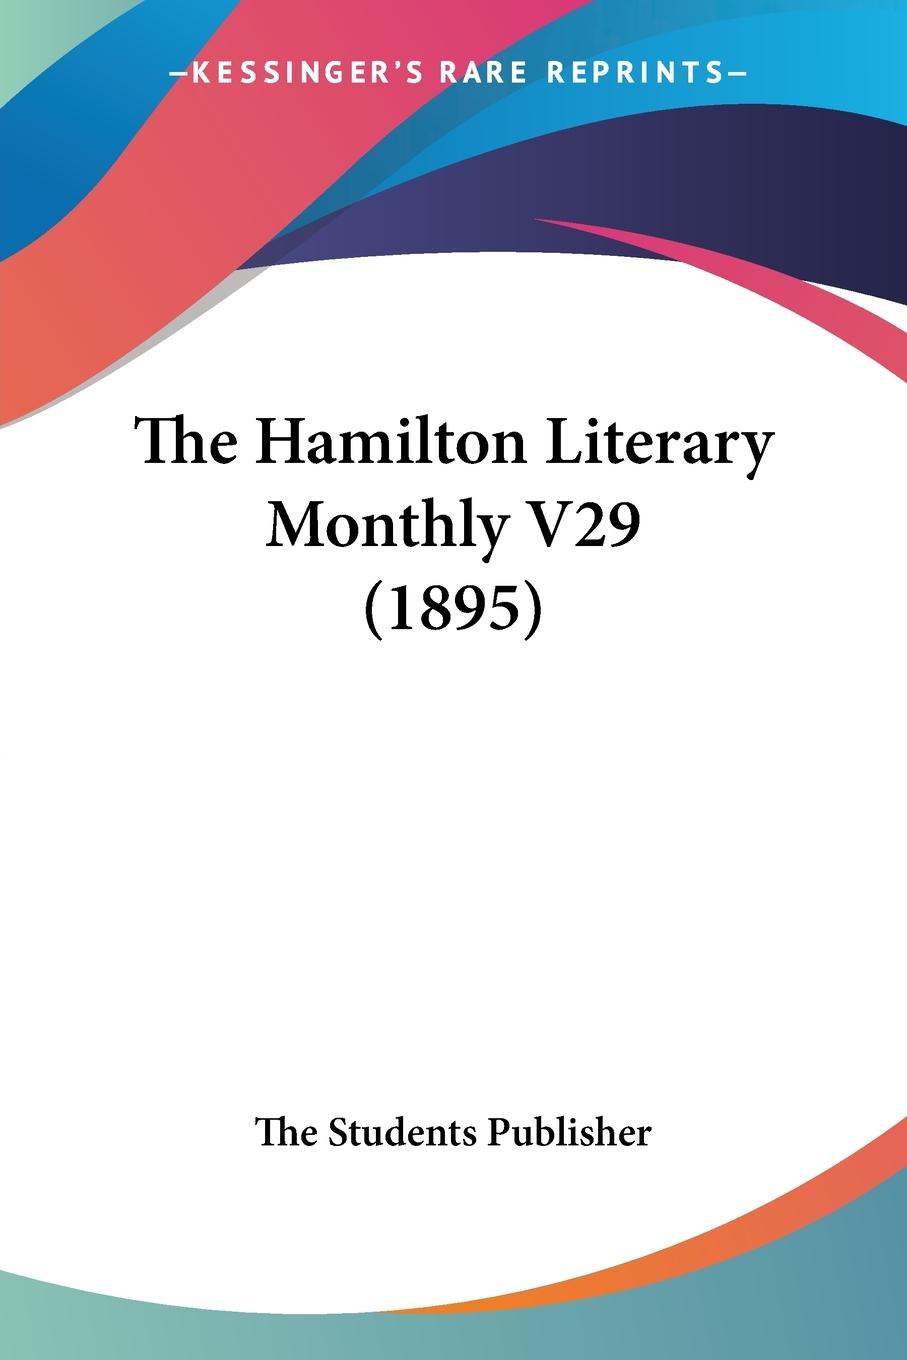 The Hamilton Literary Monthly V29 (1895) - The Students Publisher